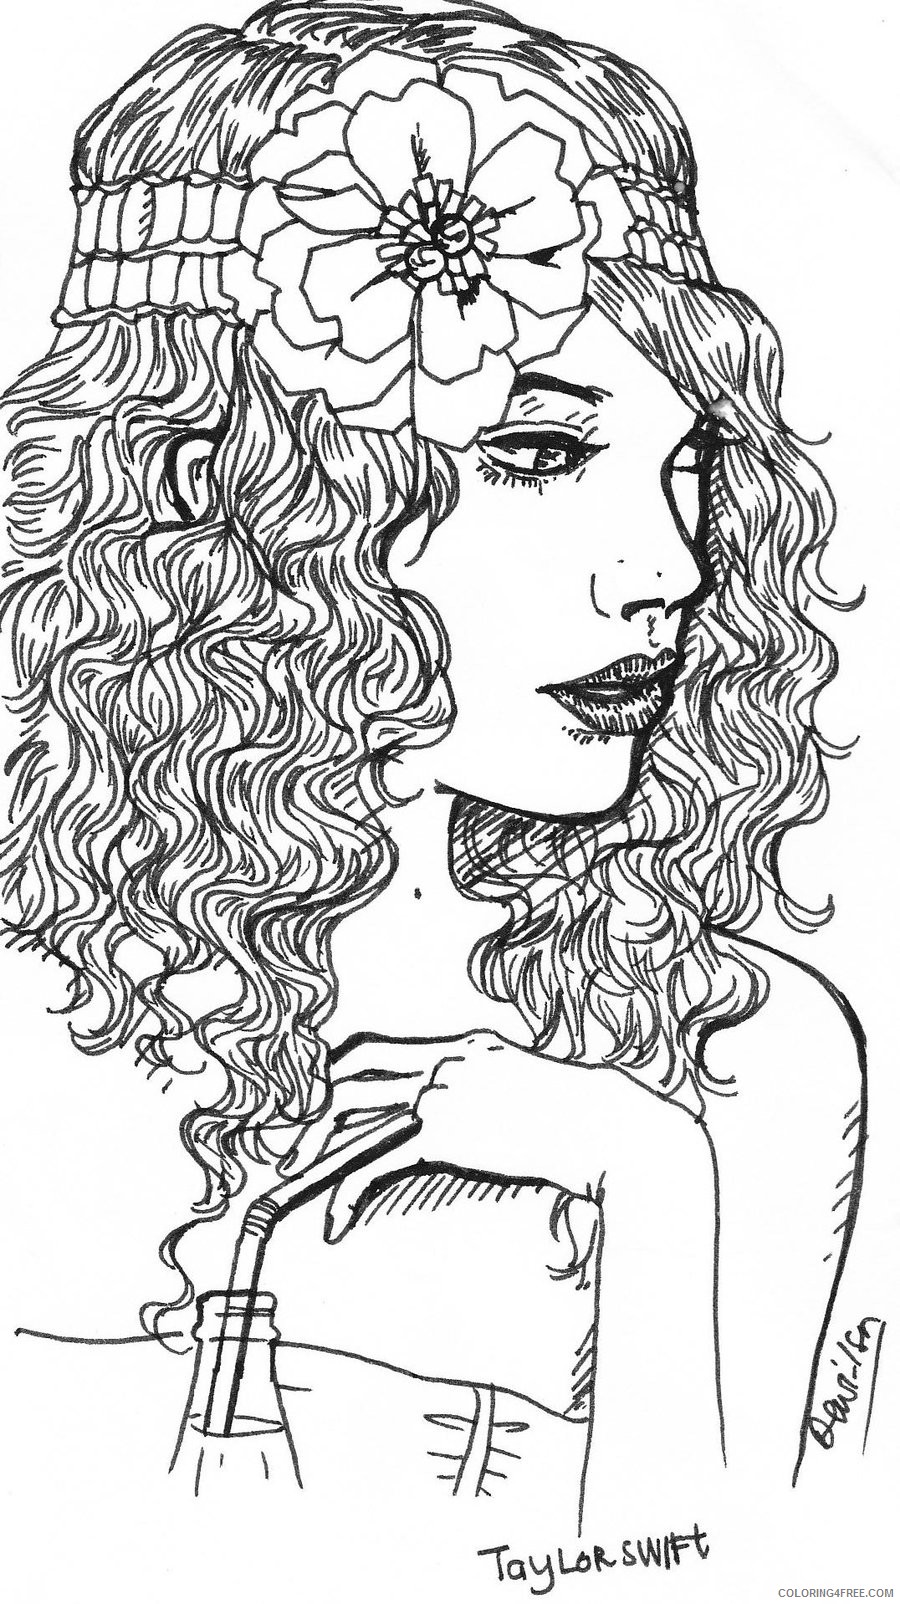 taylor swift coloring pages with curly hair Coloring4free